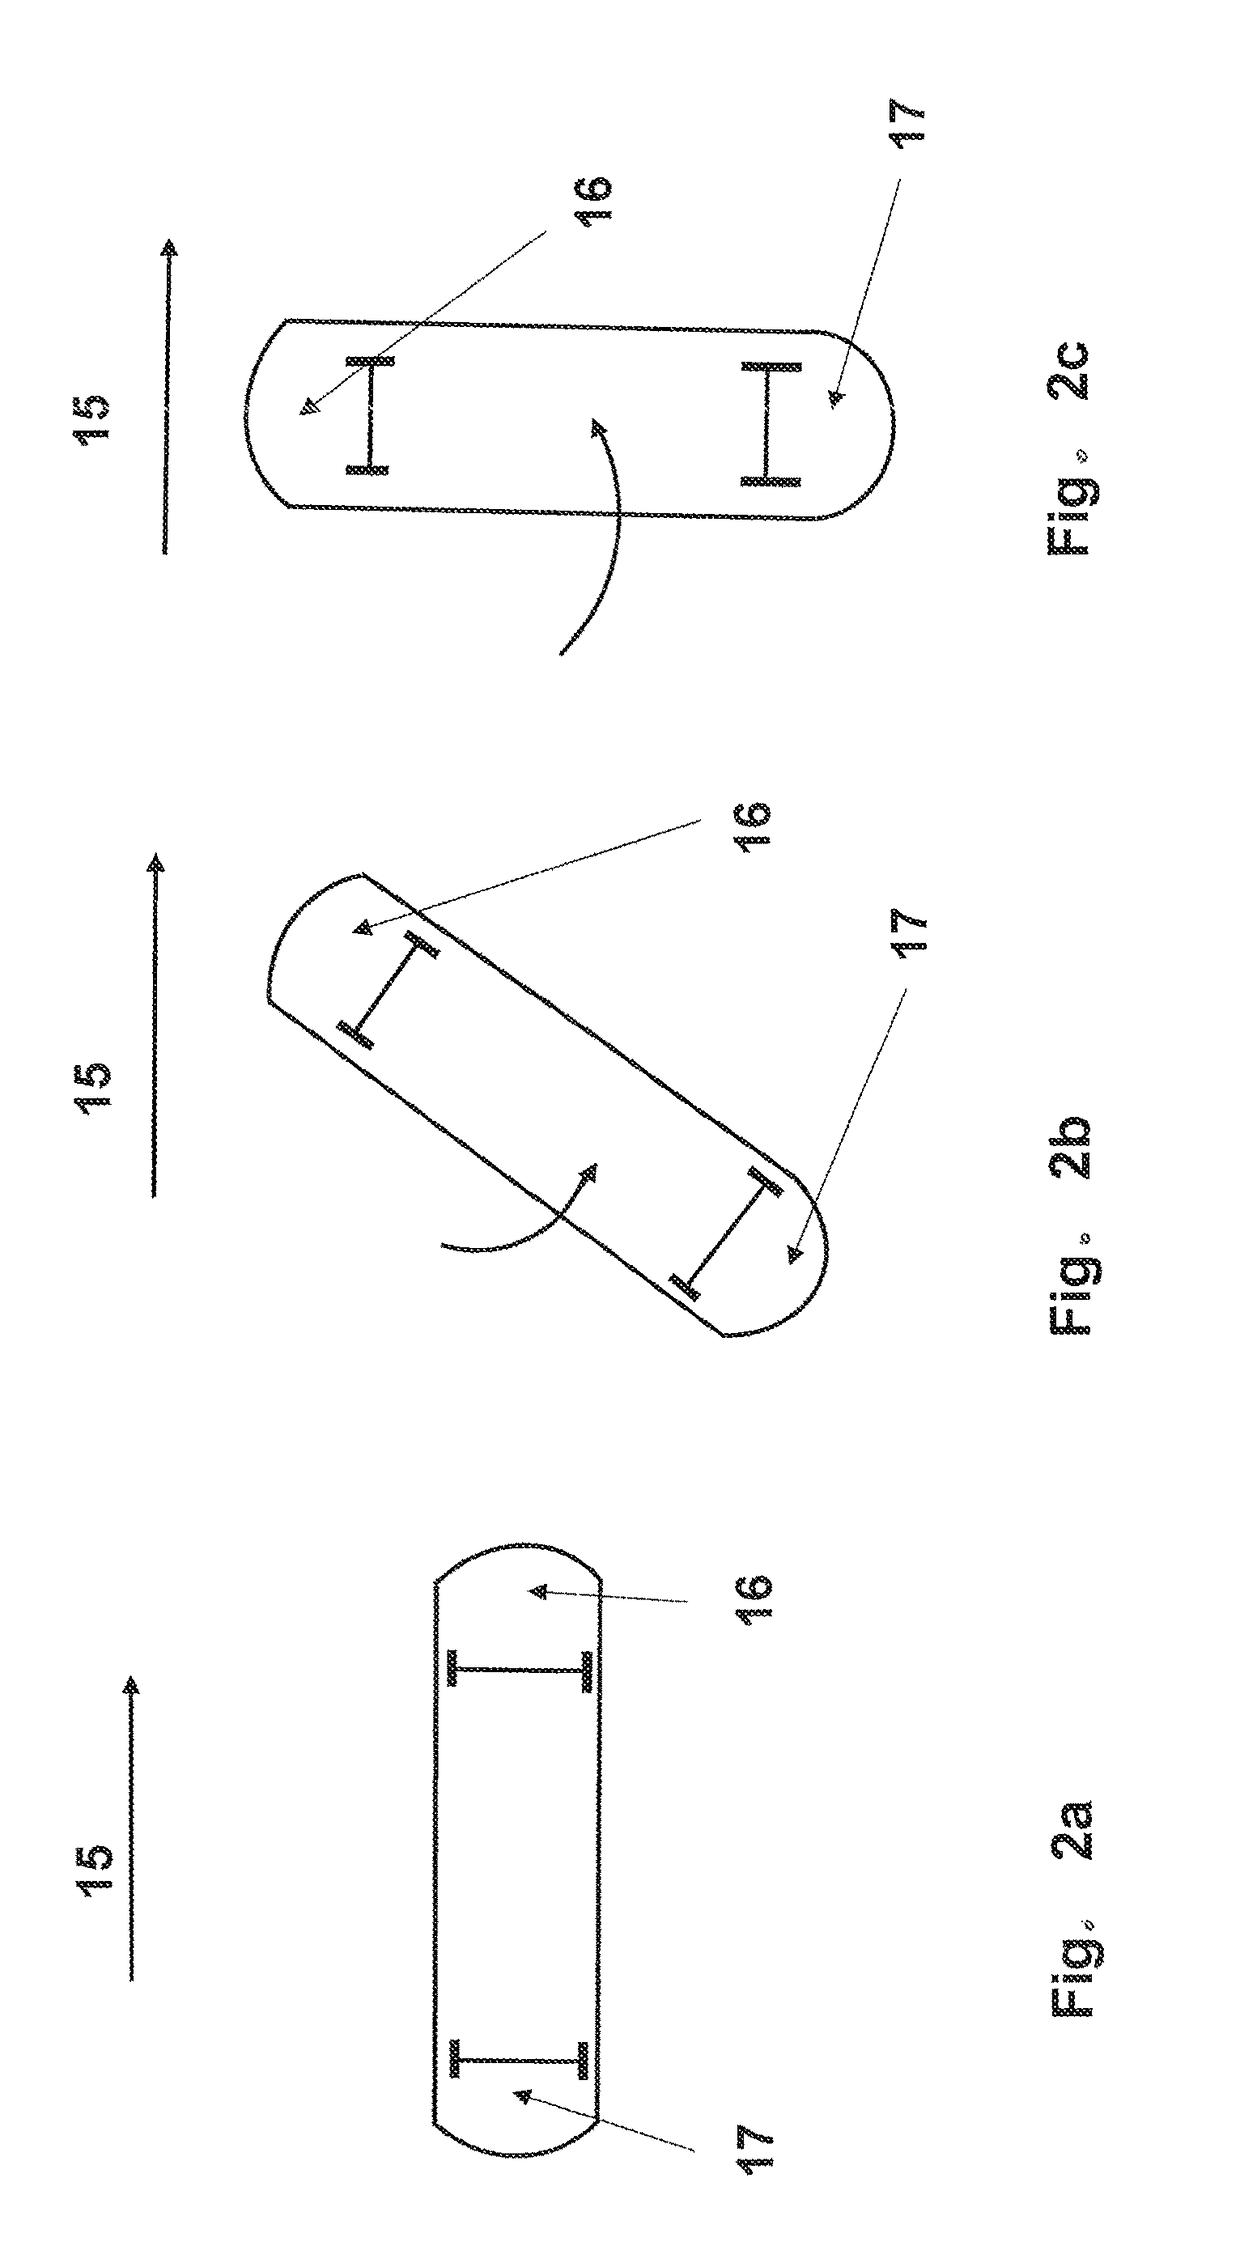 Motor control and regulating device, especially for an electrically driven skateboard or longboard